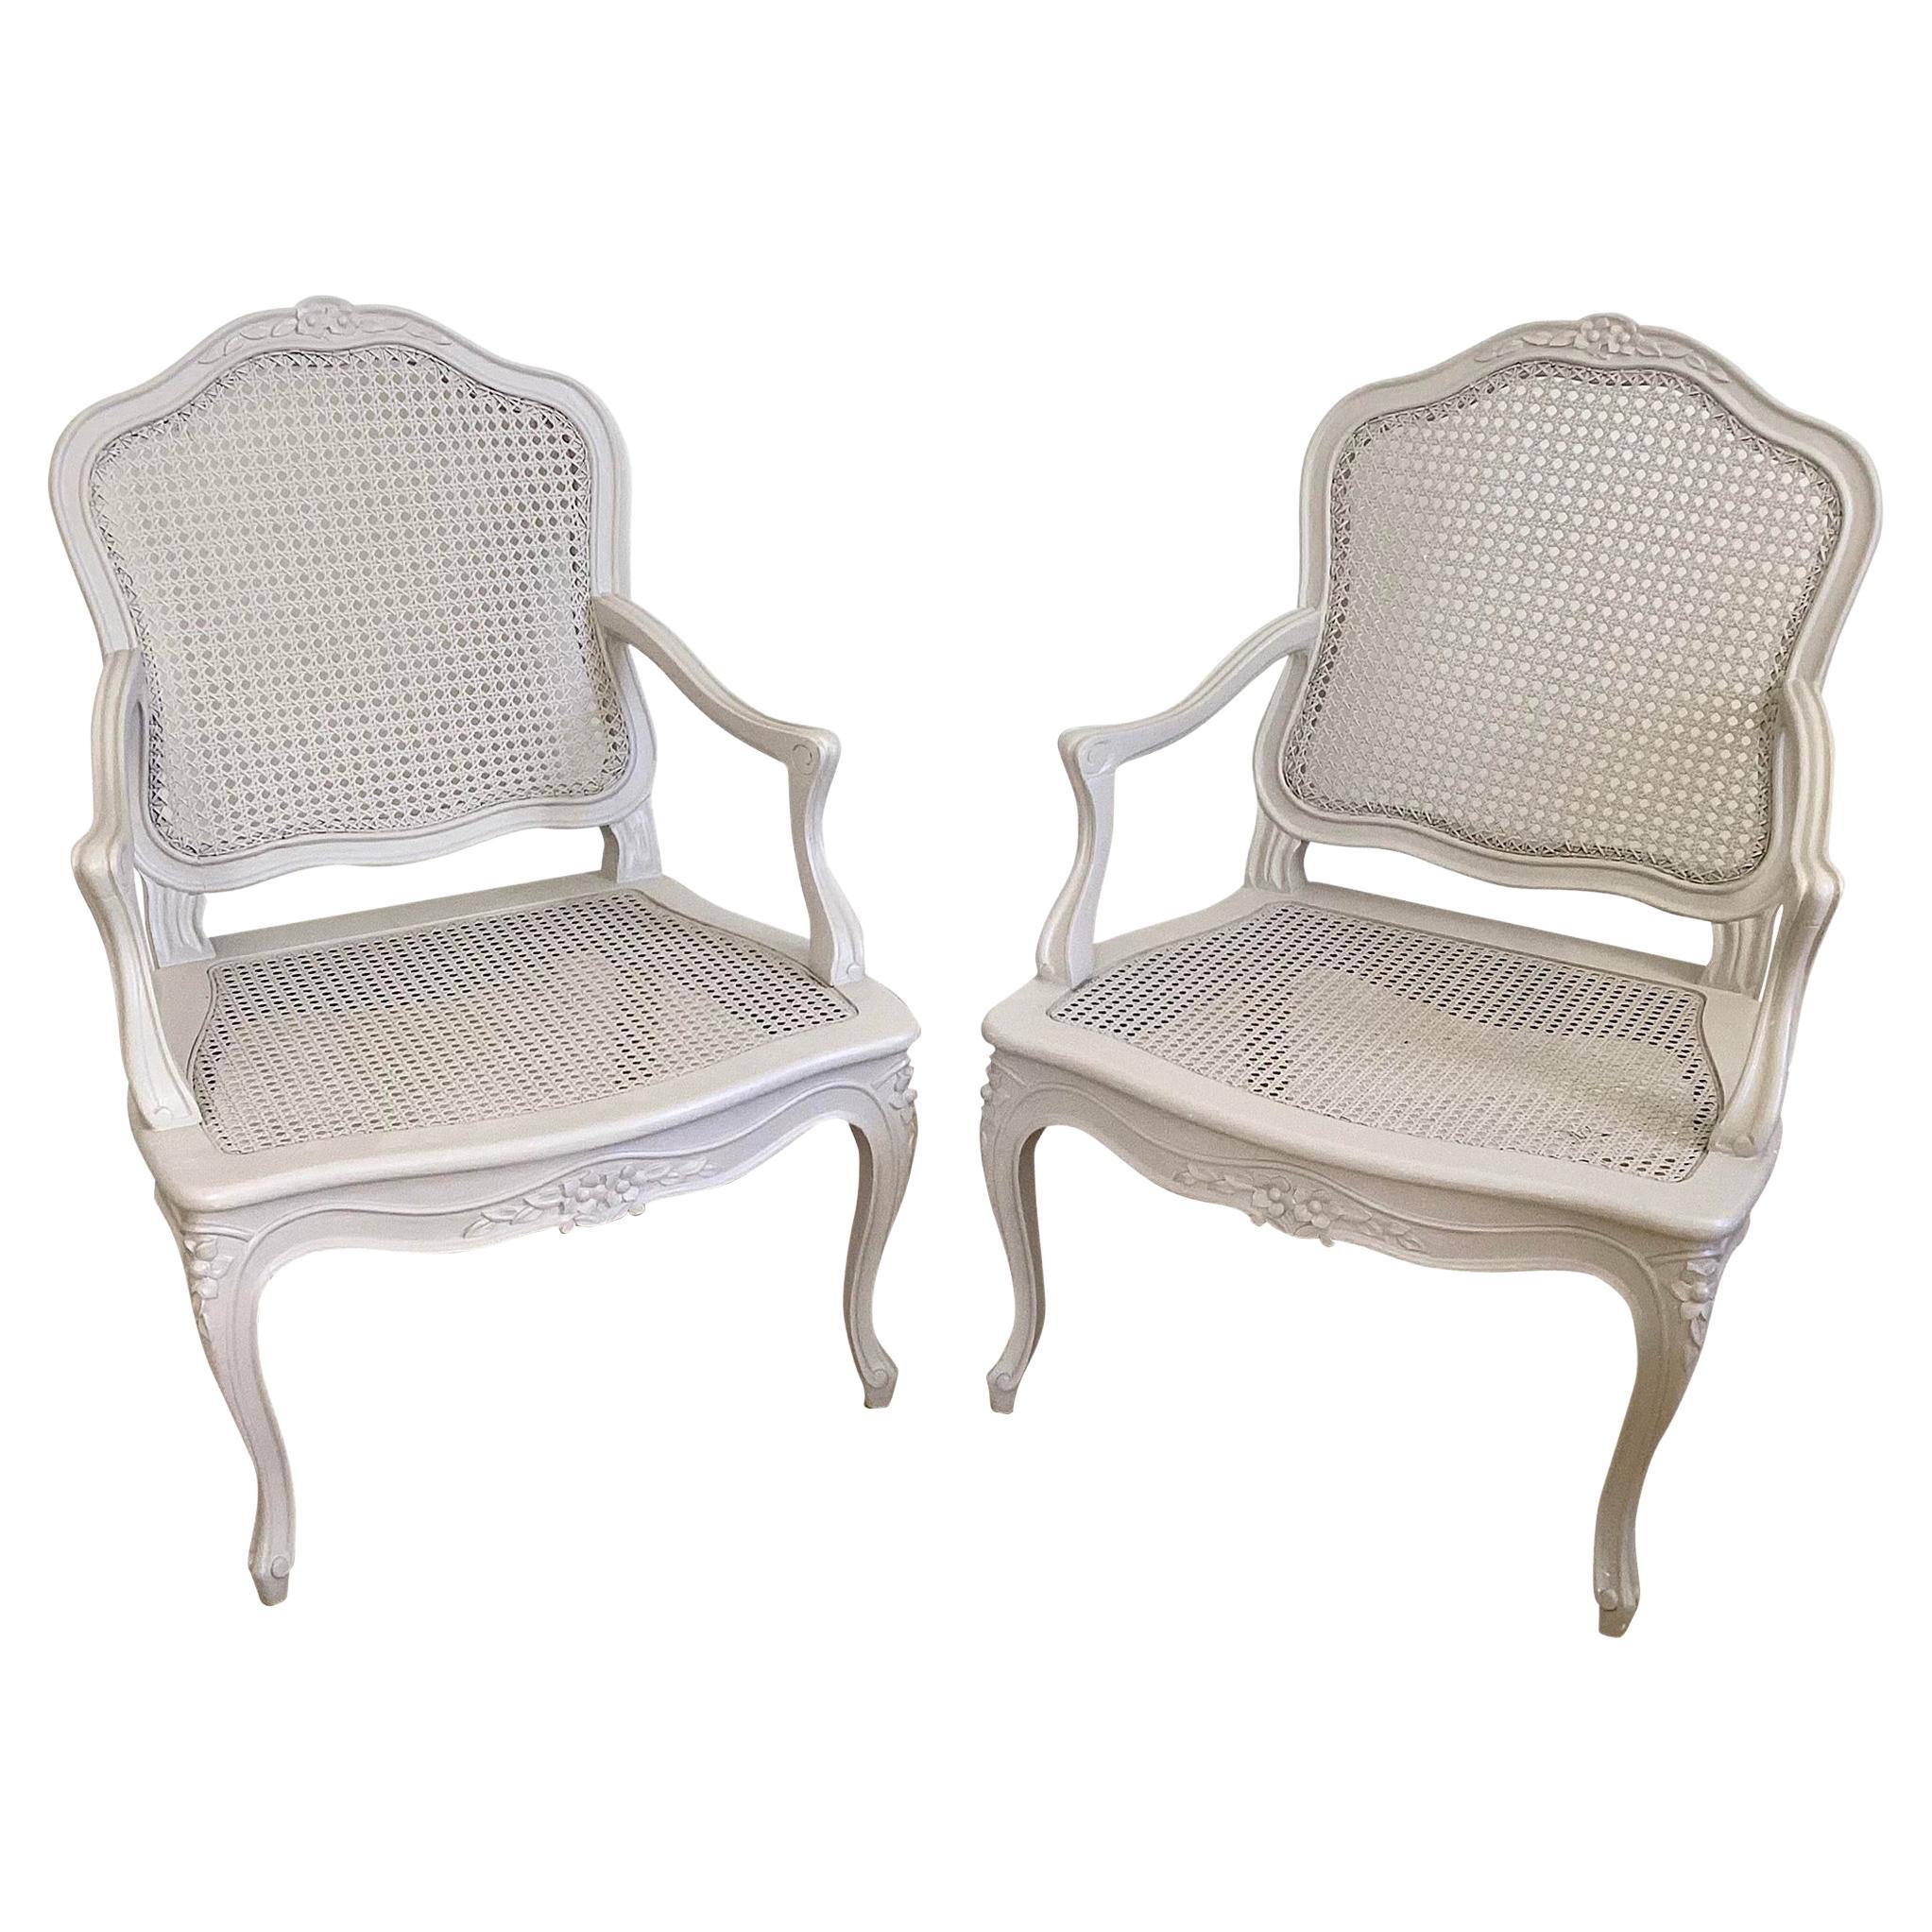 Mid-19th Century French Louis XV Fauteuil Guggenheim Collection, a Pair For Sale